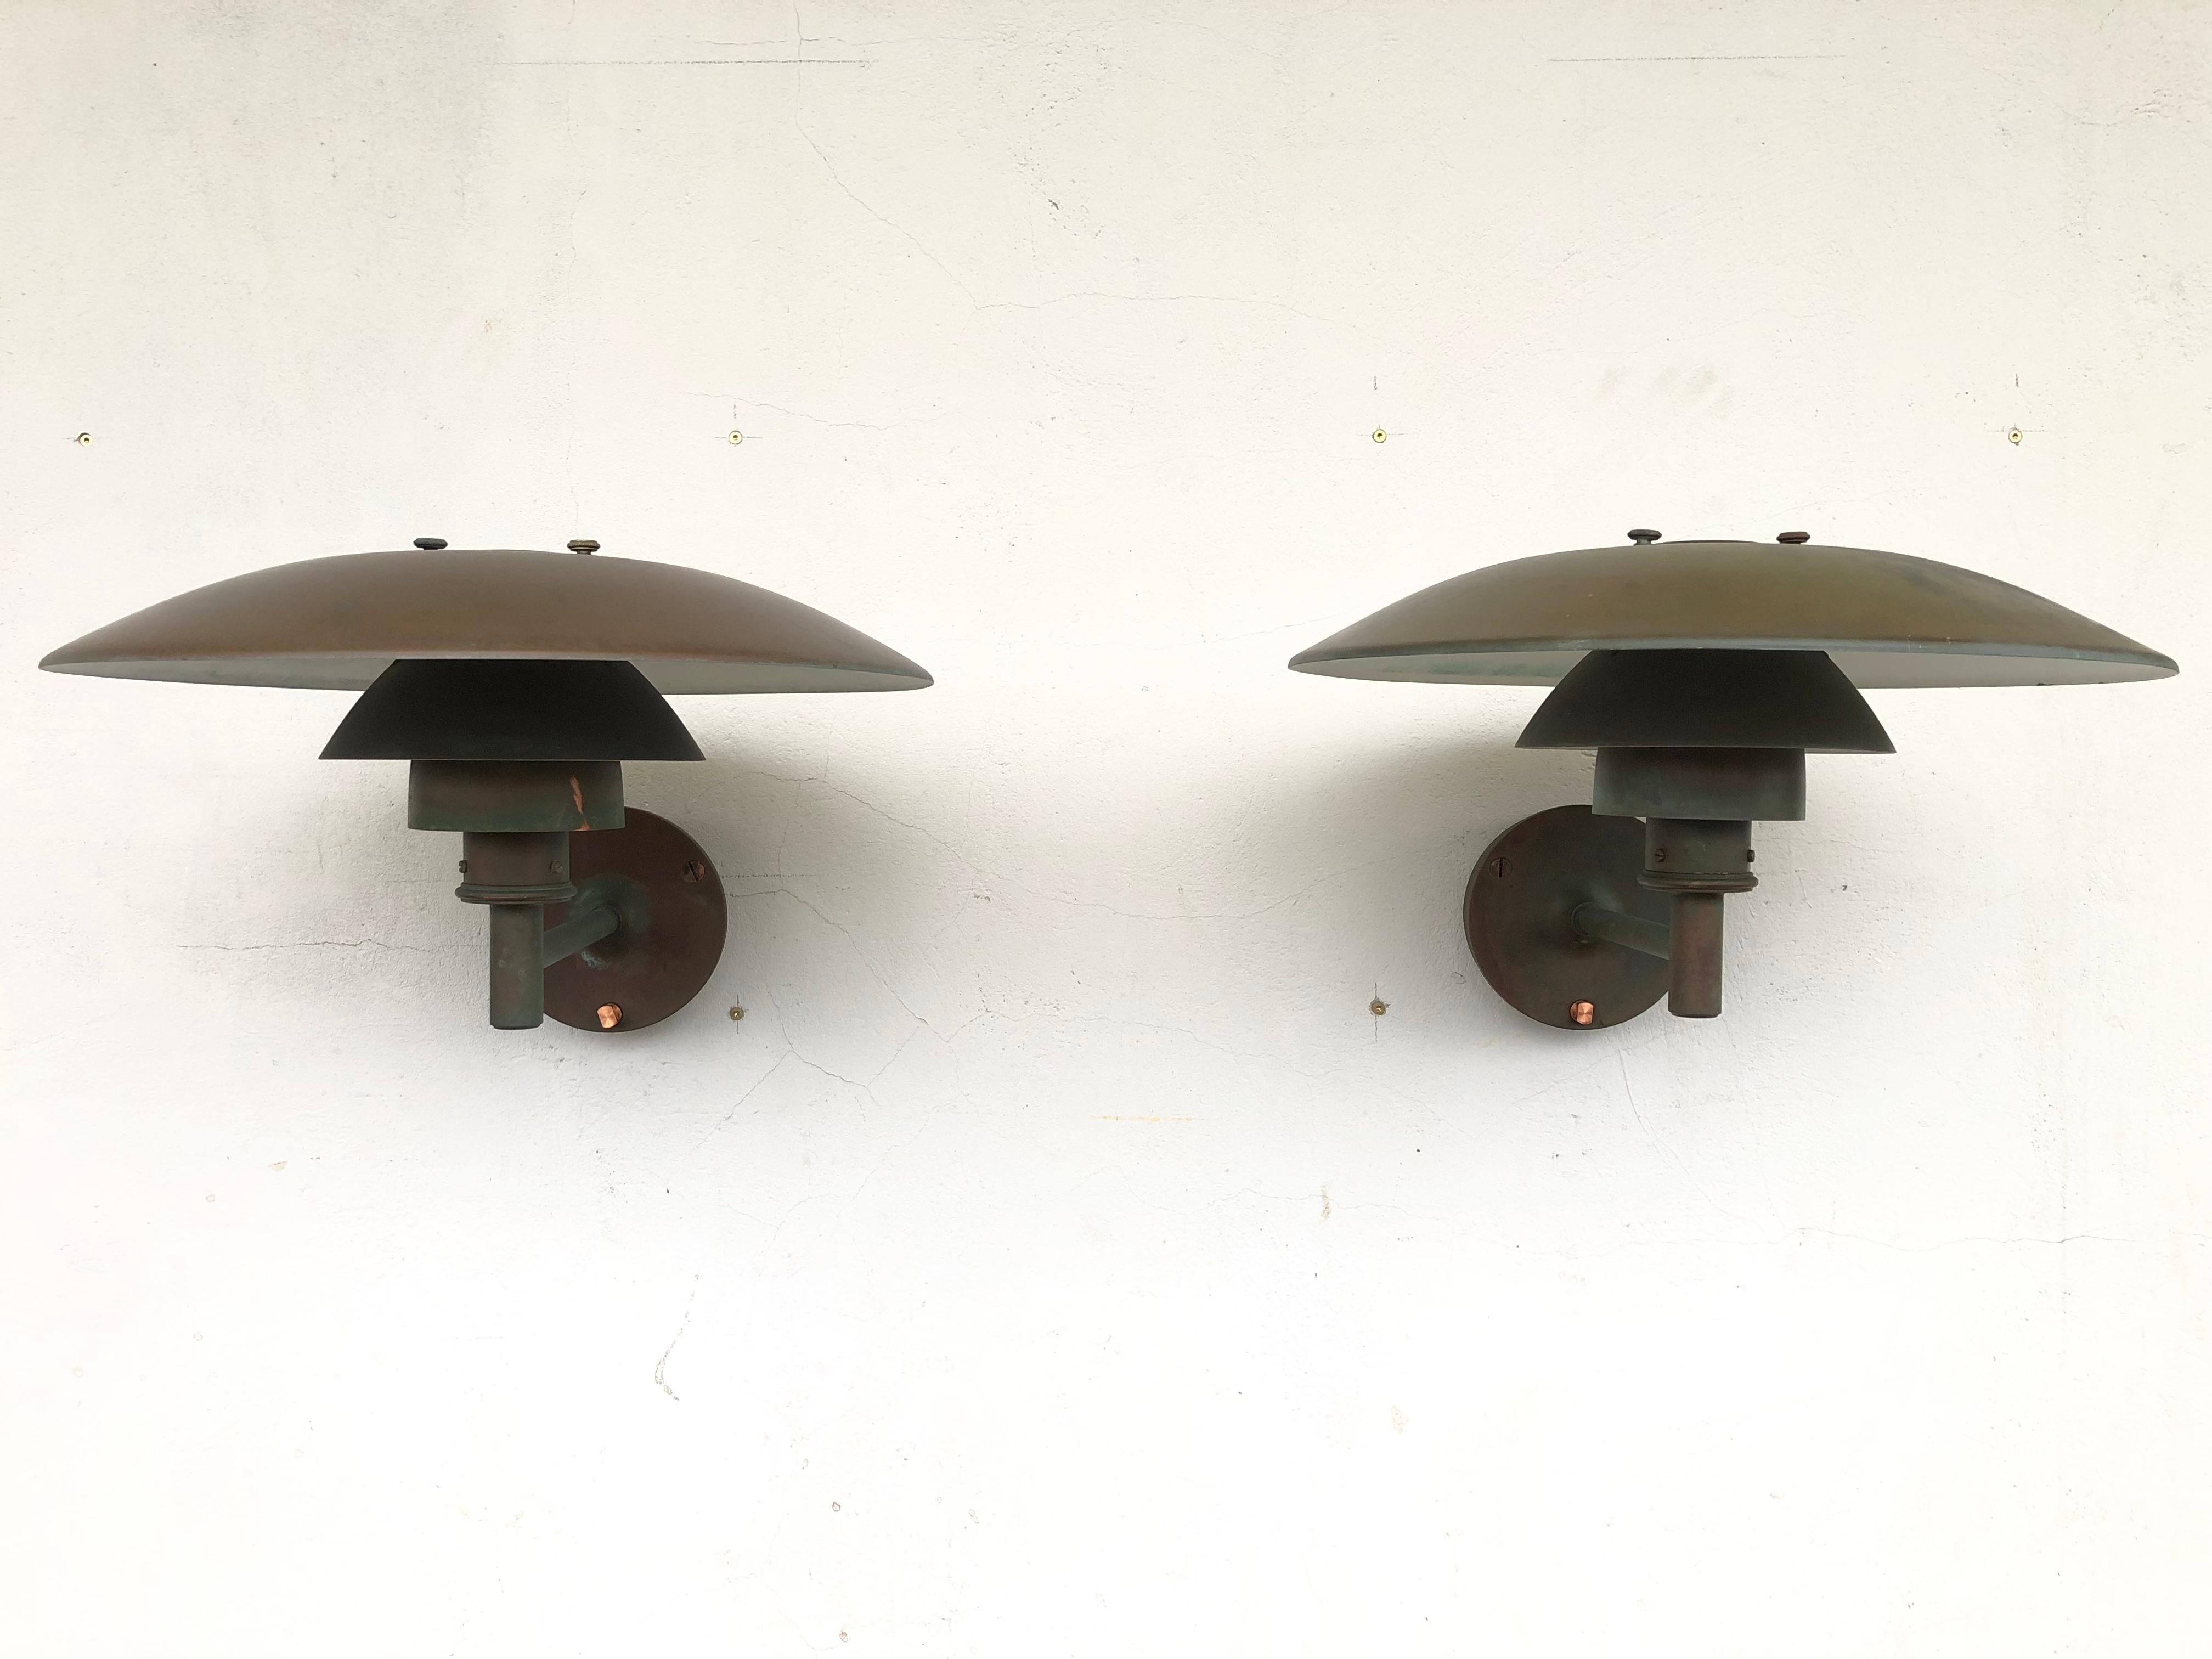 A pair of iconic Poul Henningsen copper wall lamps PH 4.5 made in Denmark by Louis Poulsen from the 1980s.
This iconic lamp was first designed in 1966 and has been a Classic ever since
These lamps are in original condition with a lovely patina and